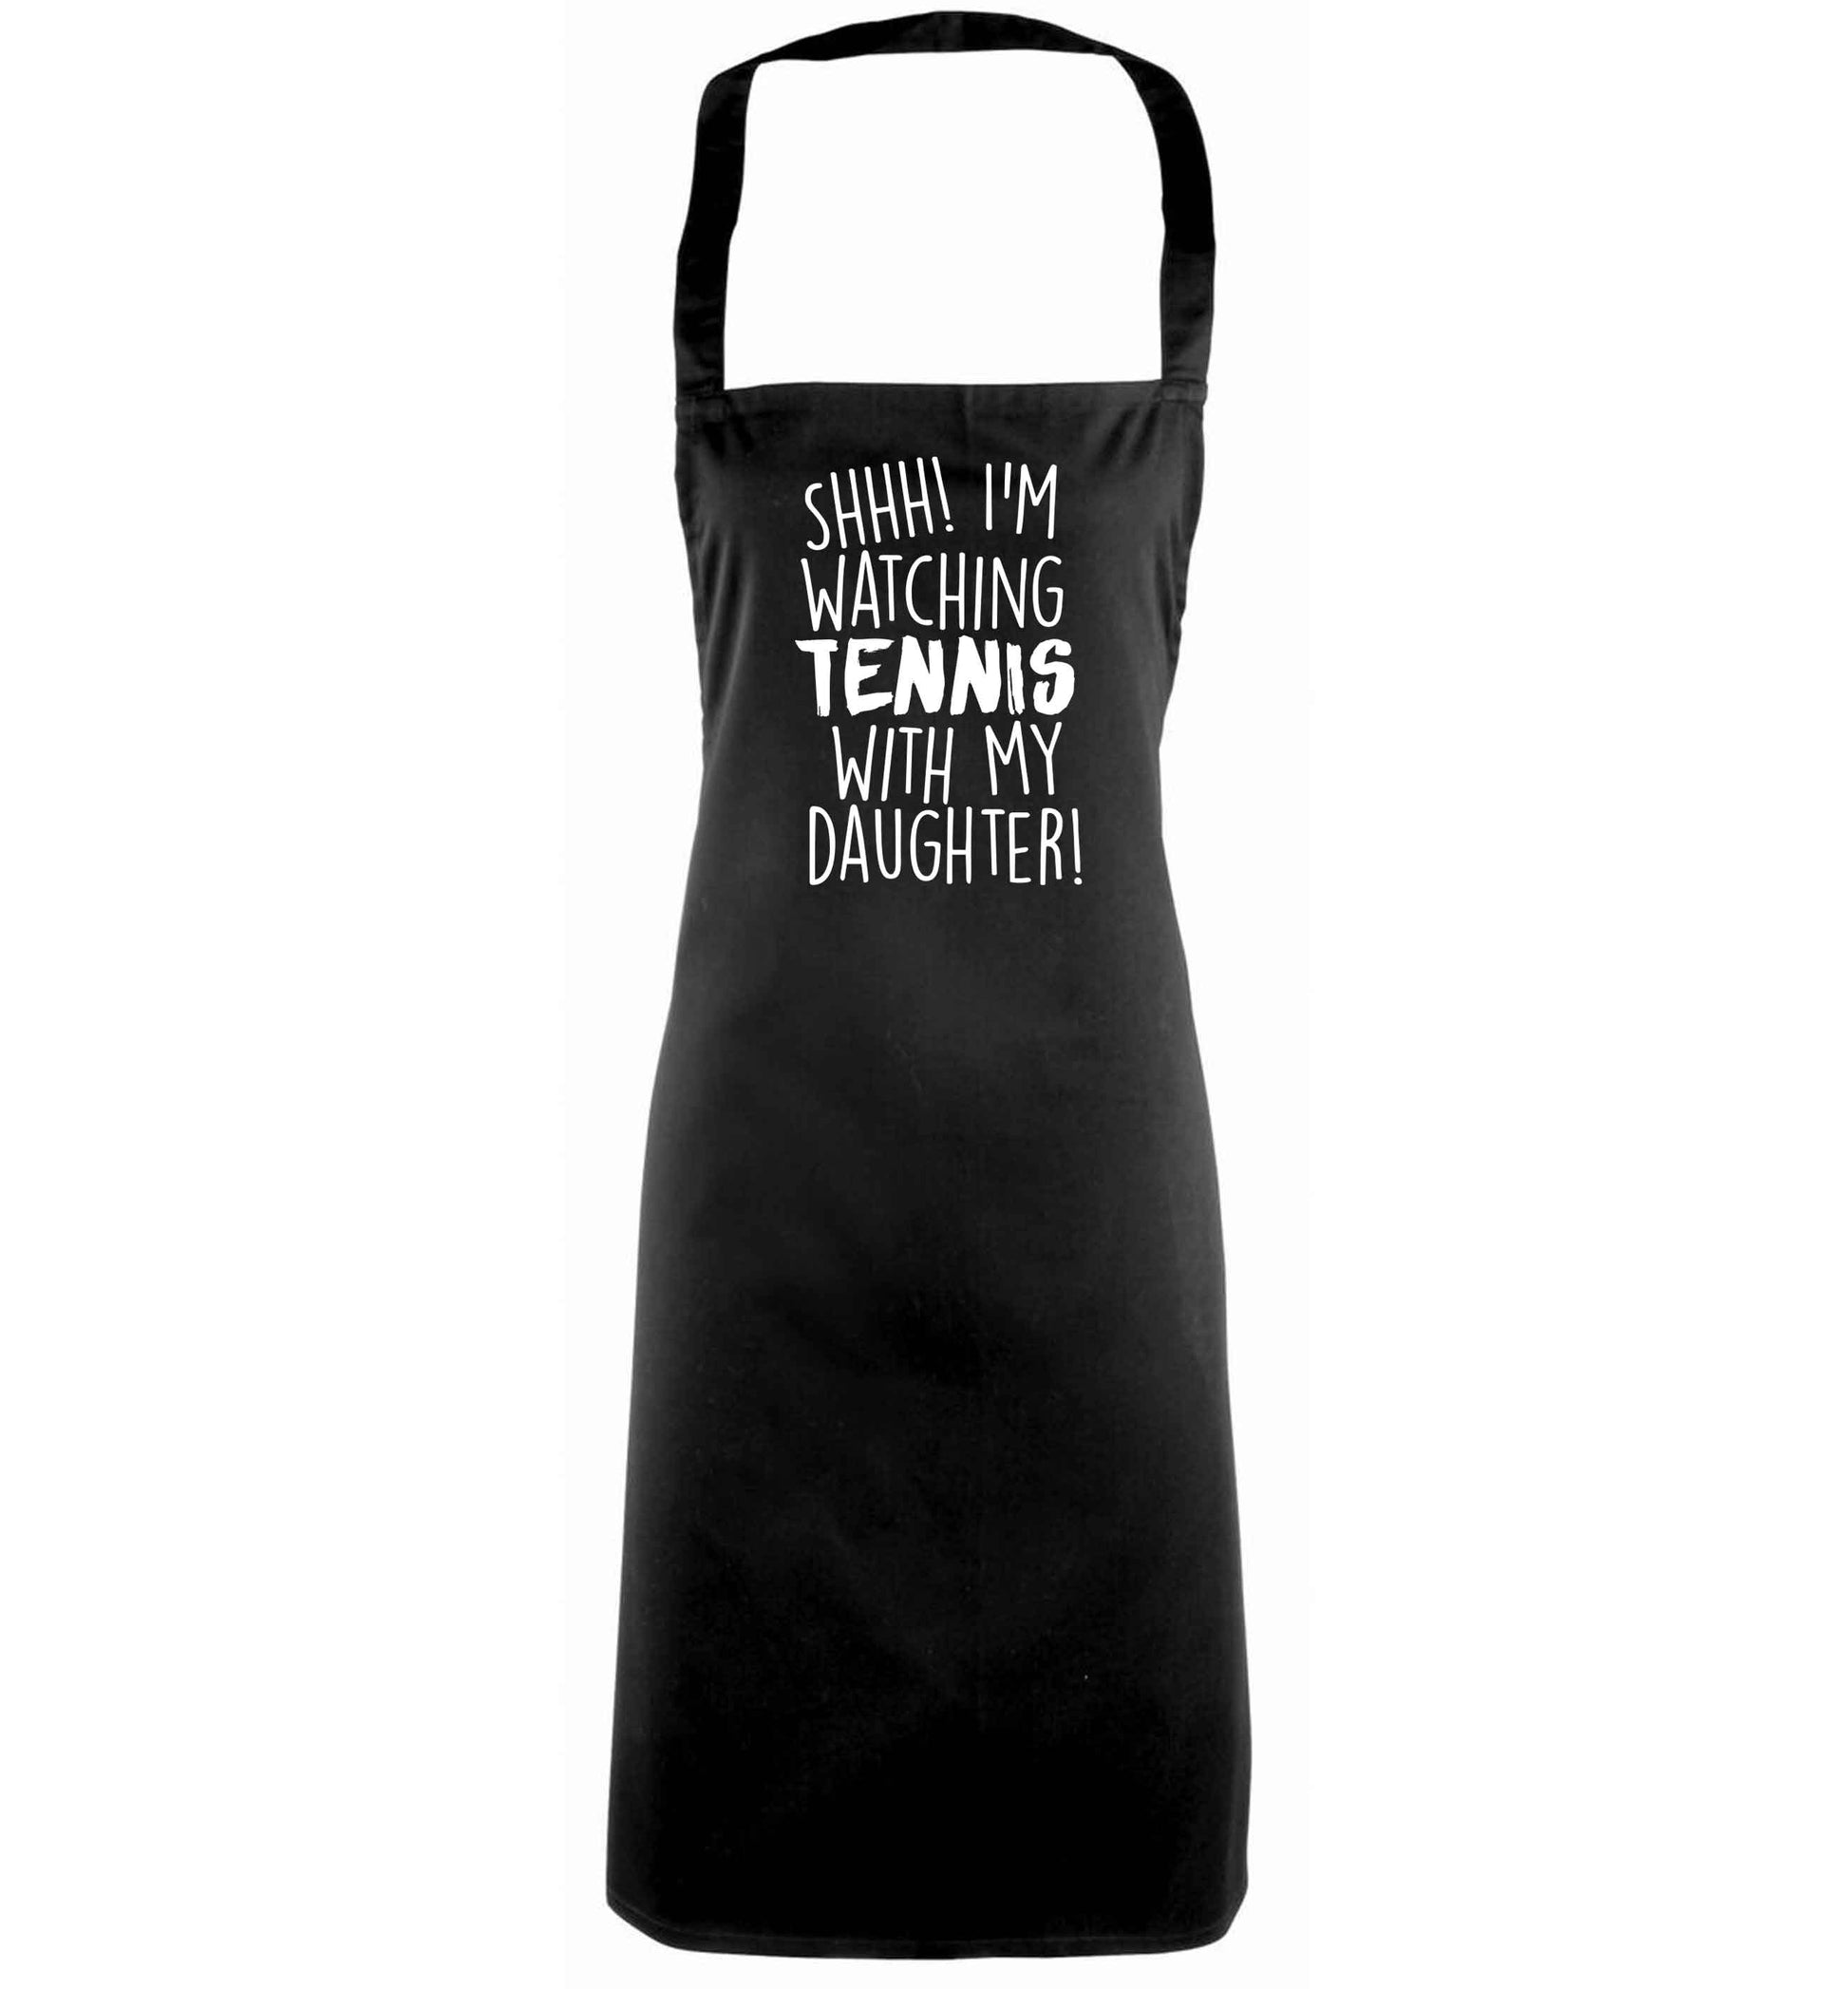 Shh! I'm watching tennis with my daughter! black apron